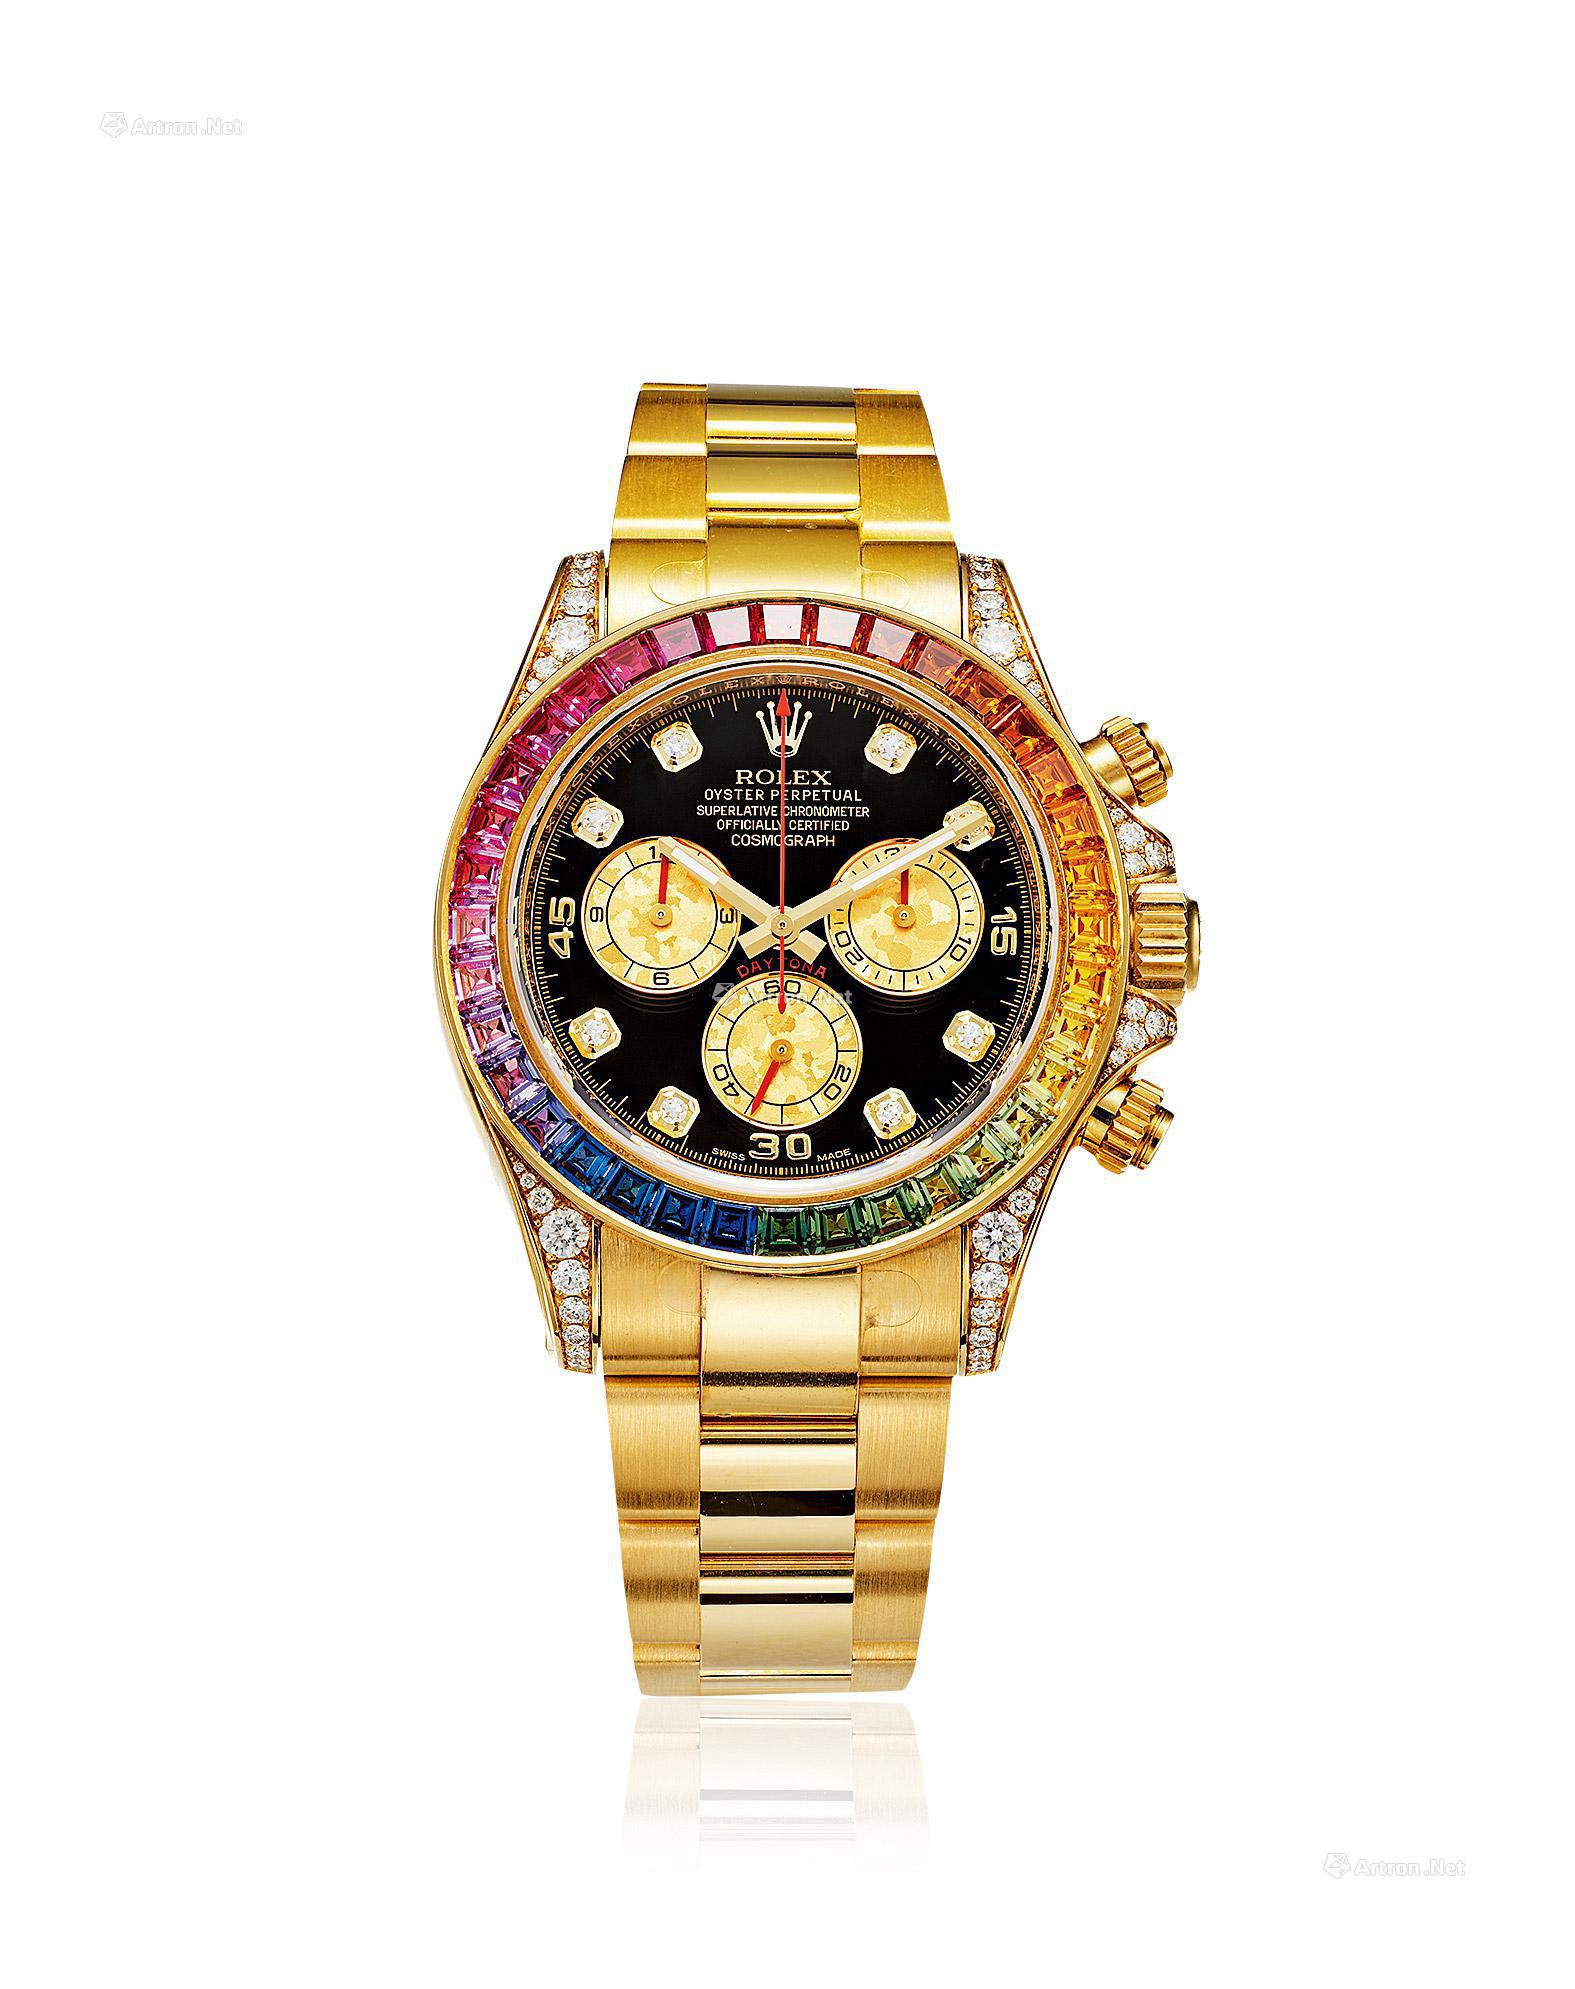 ROLEX  A VERY RARE AND ATTRACTIVE YELLOW GOLD， DIAMOND AND RAINBOW SAPPHIRE-SET AUTOMATIC CHRONOGRAPH BRACELET WATCH， WITH SMALL SECONDS， CERTIFICATE OF ORIGIN AND PRESENTATION BOX